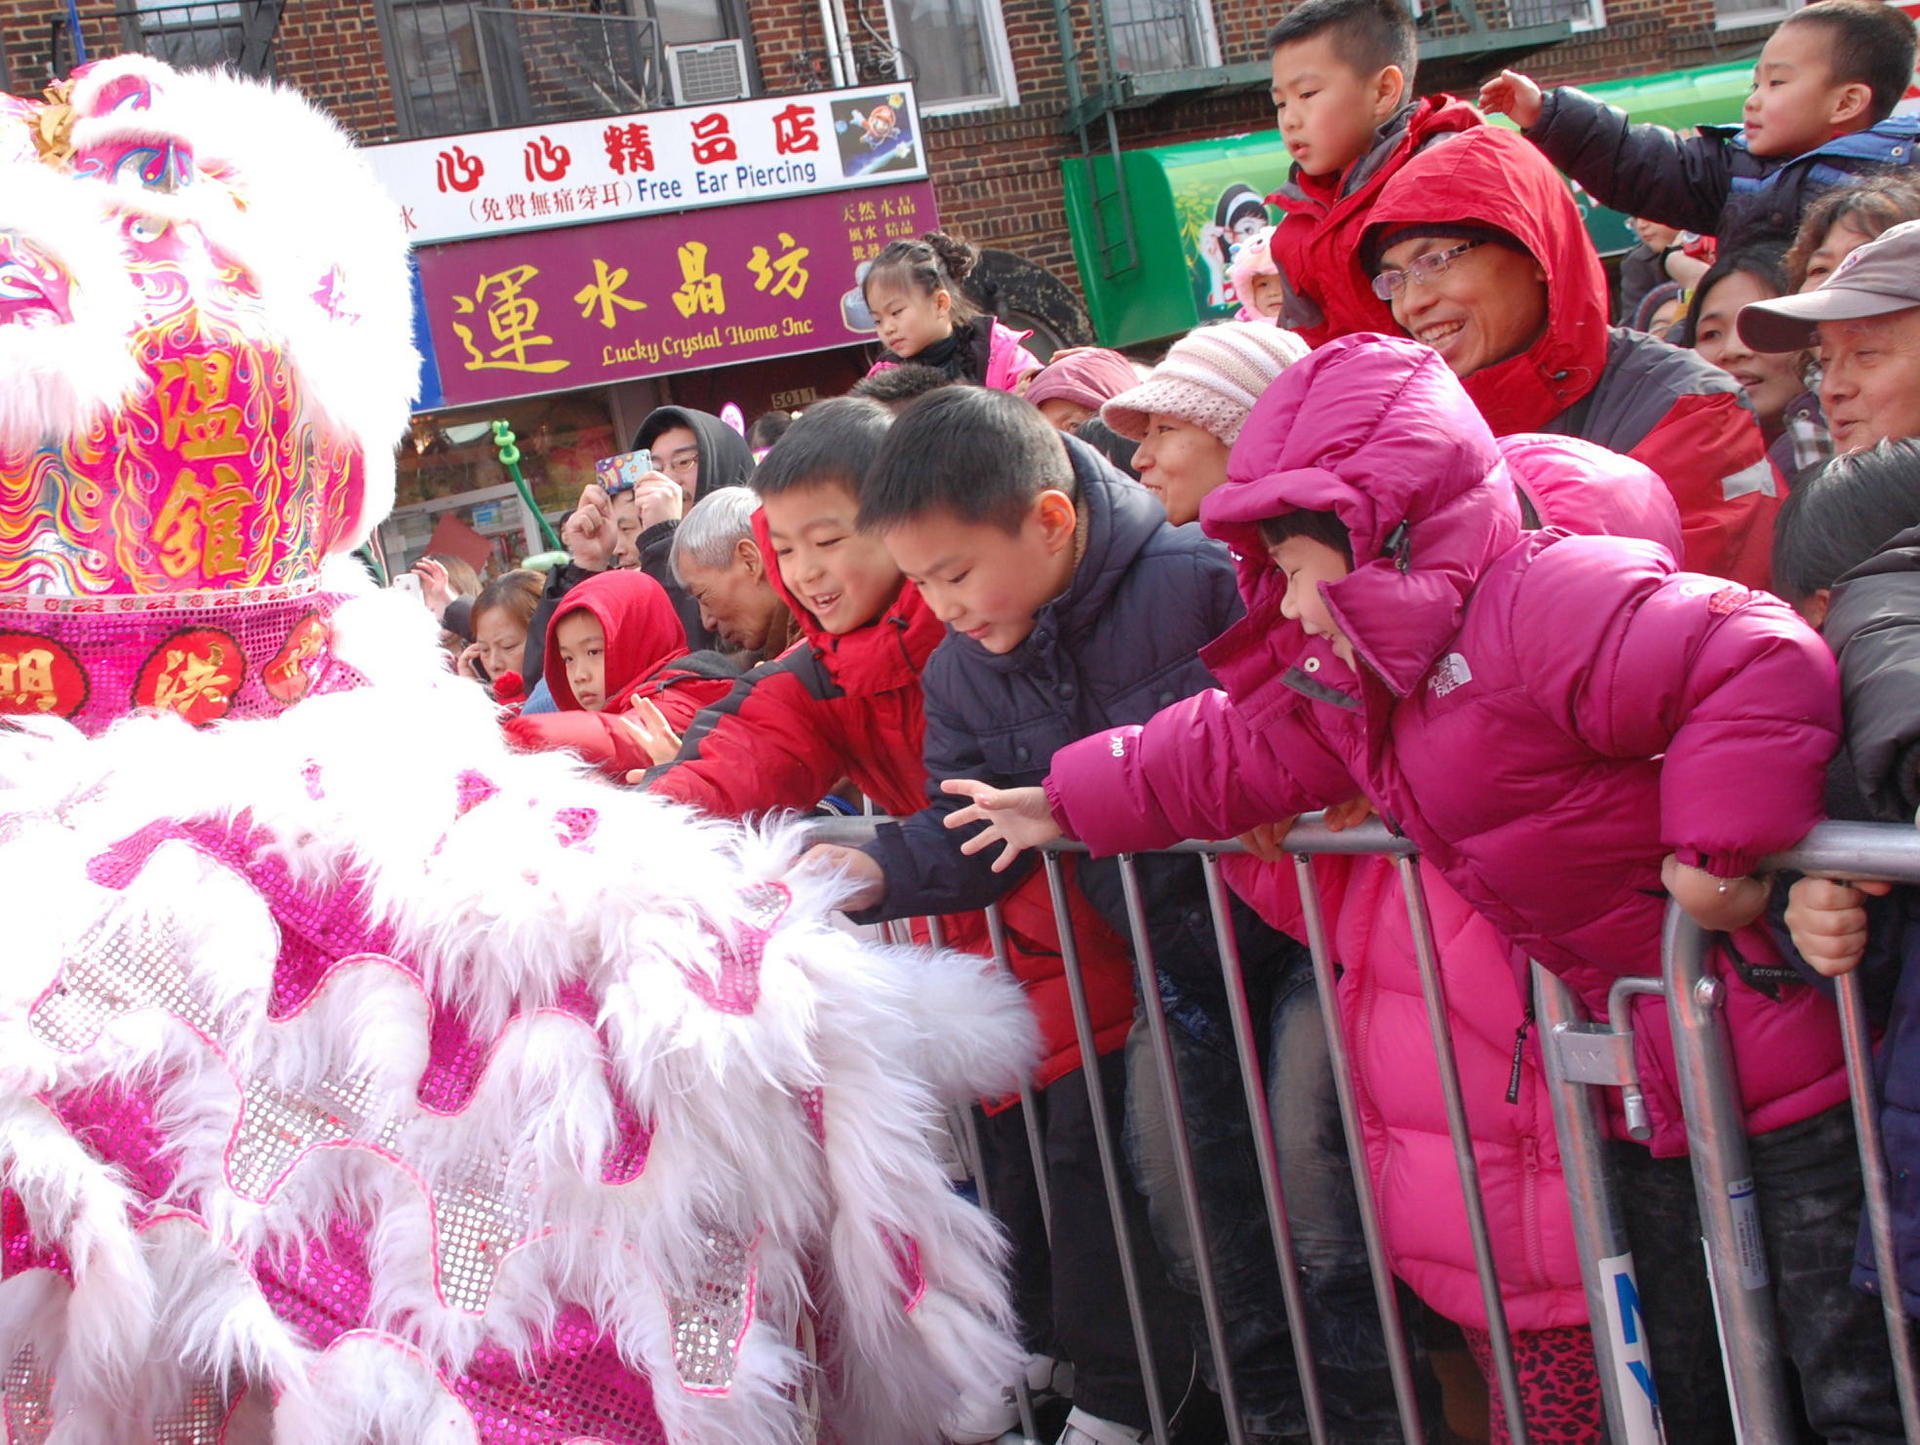 Lunar New Year celebrations in Brooklyn, New York, last year. Photo: Rong Xiaoqing